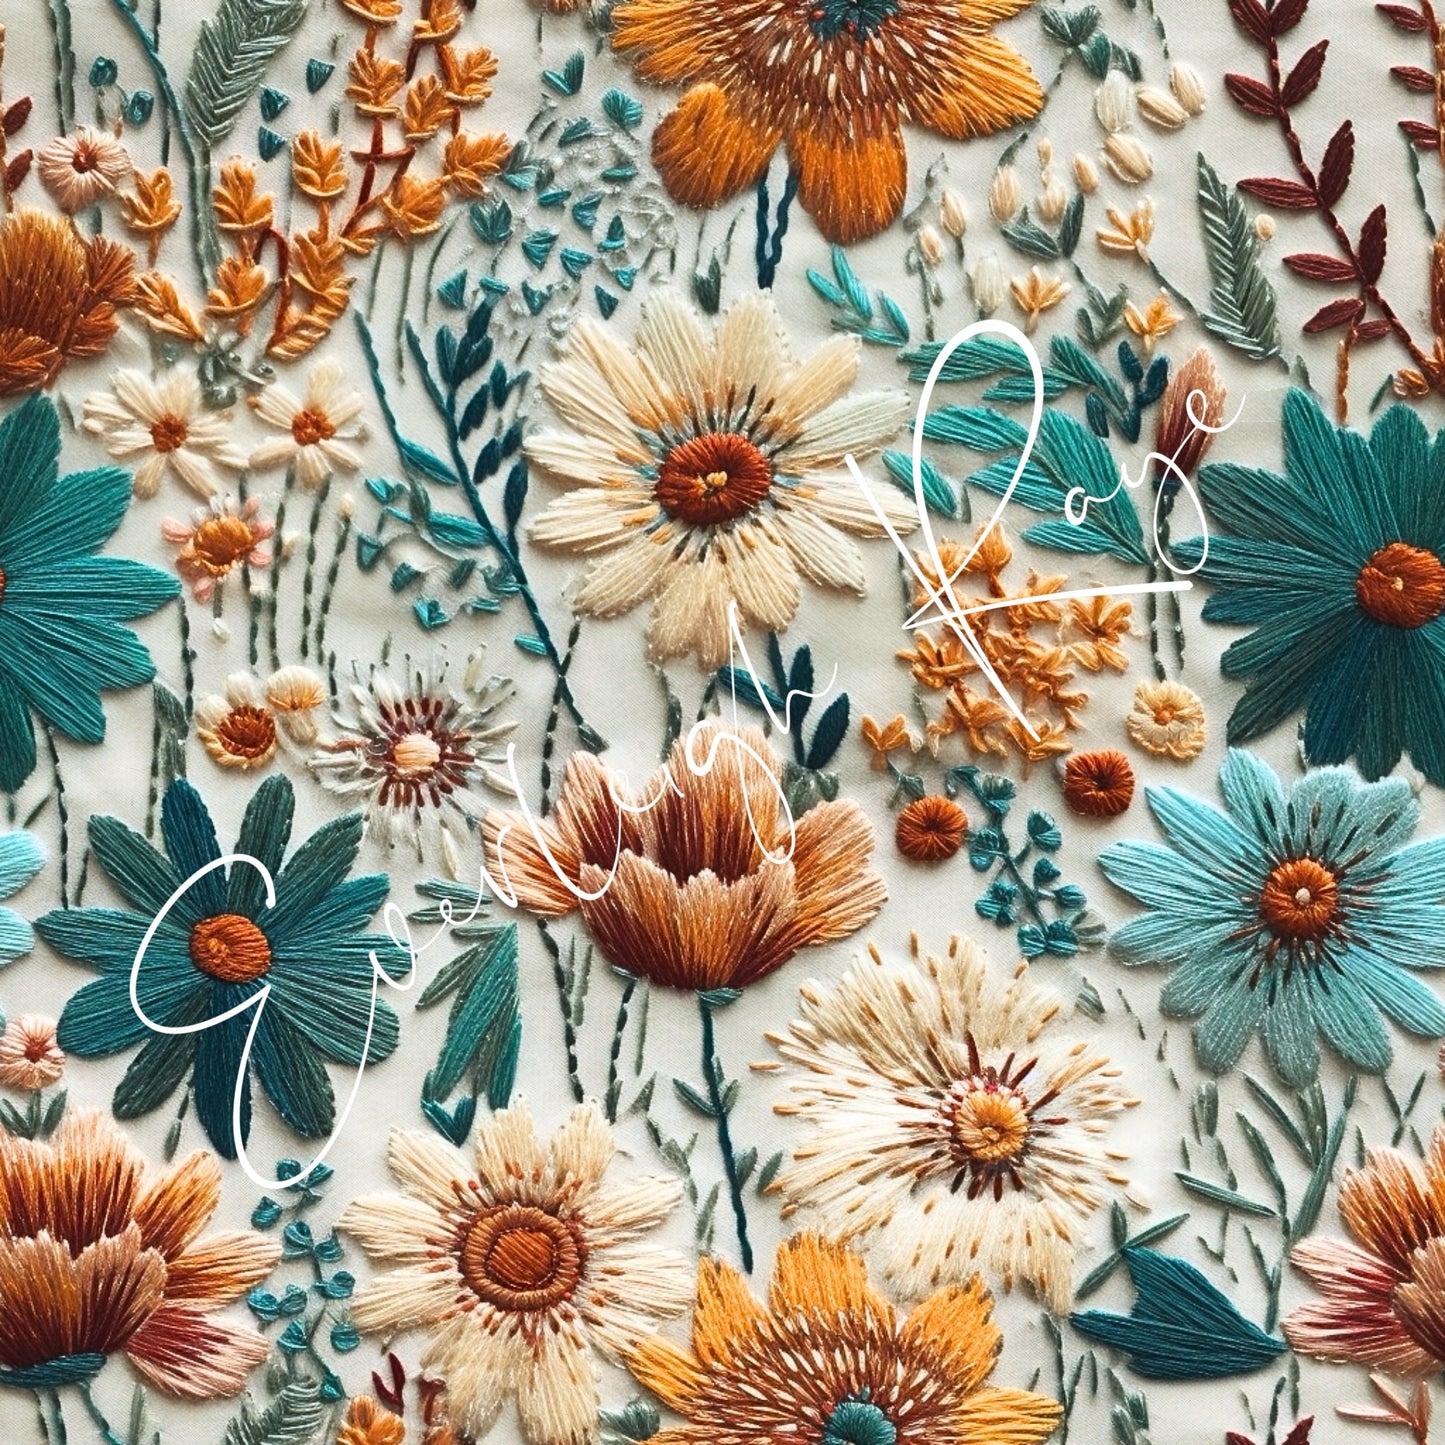 RUST & TEAL EMBROIDERY ROSES